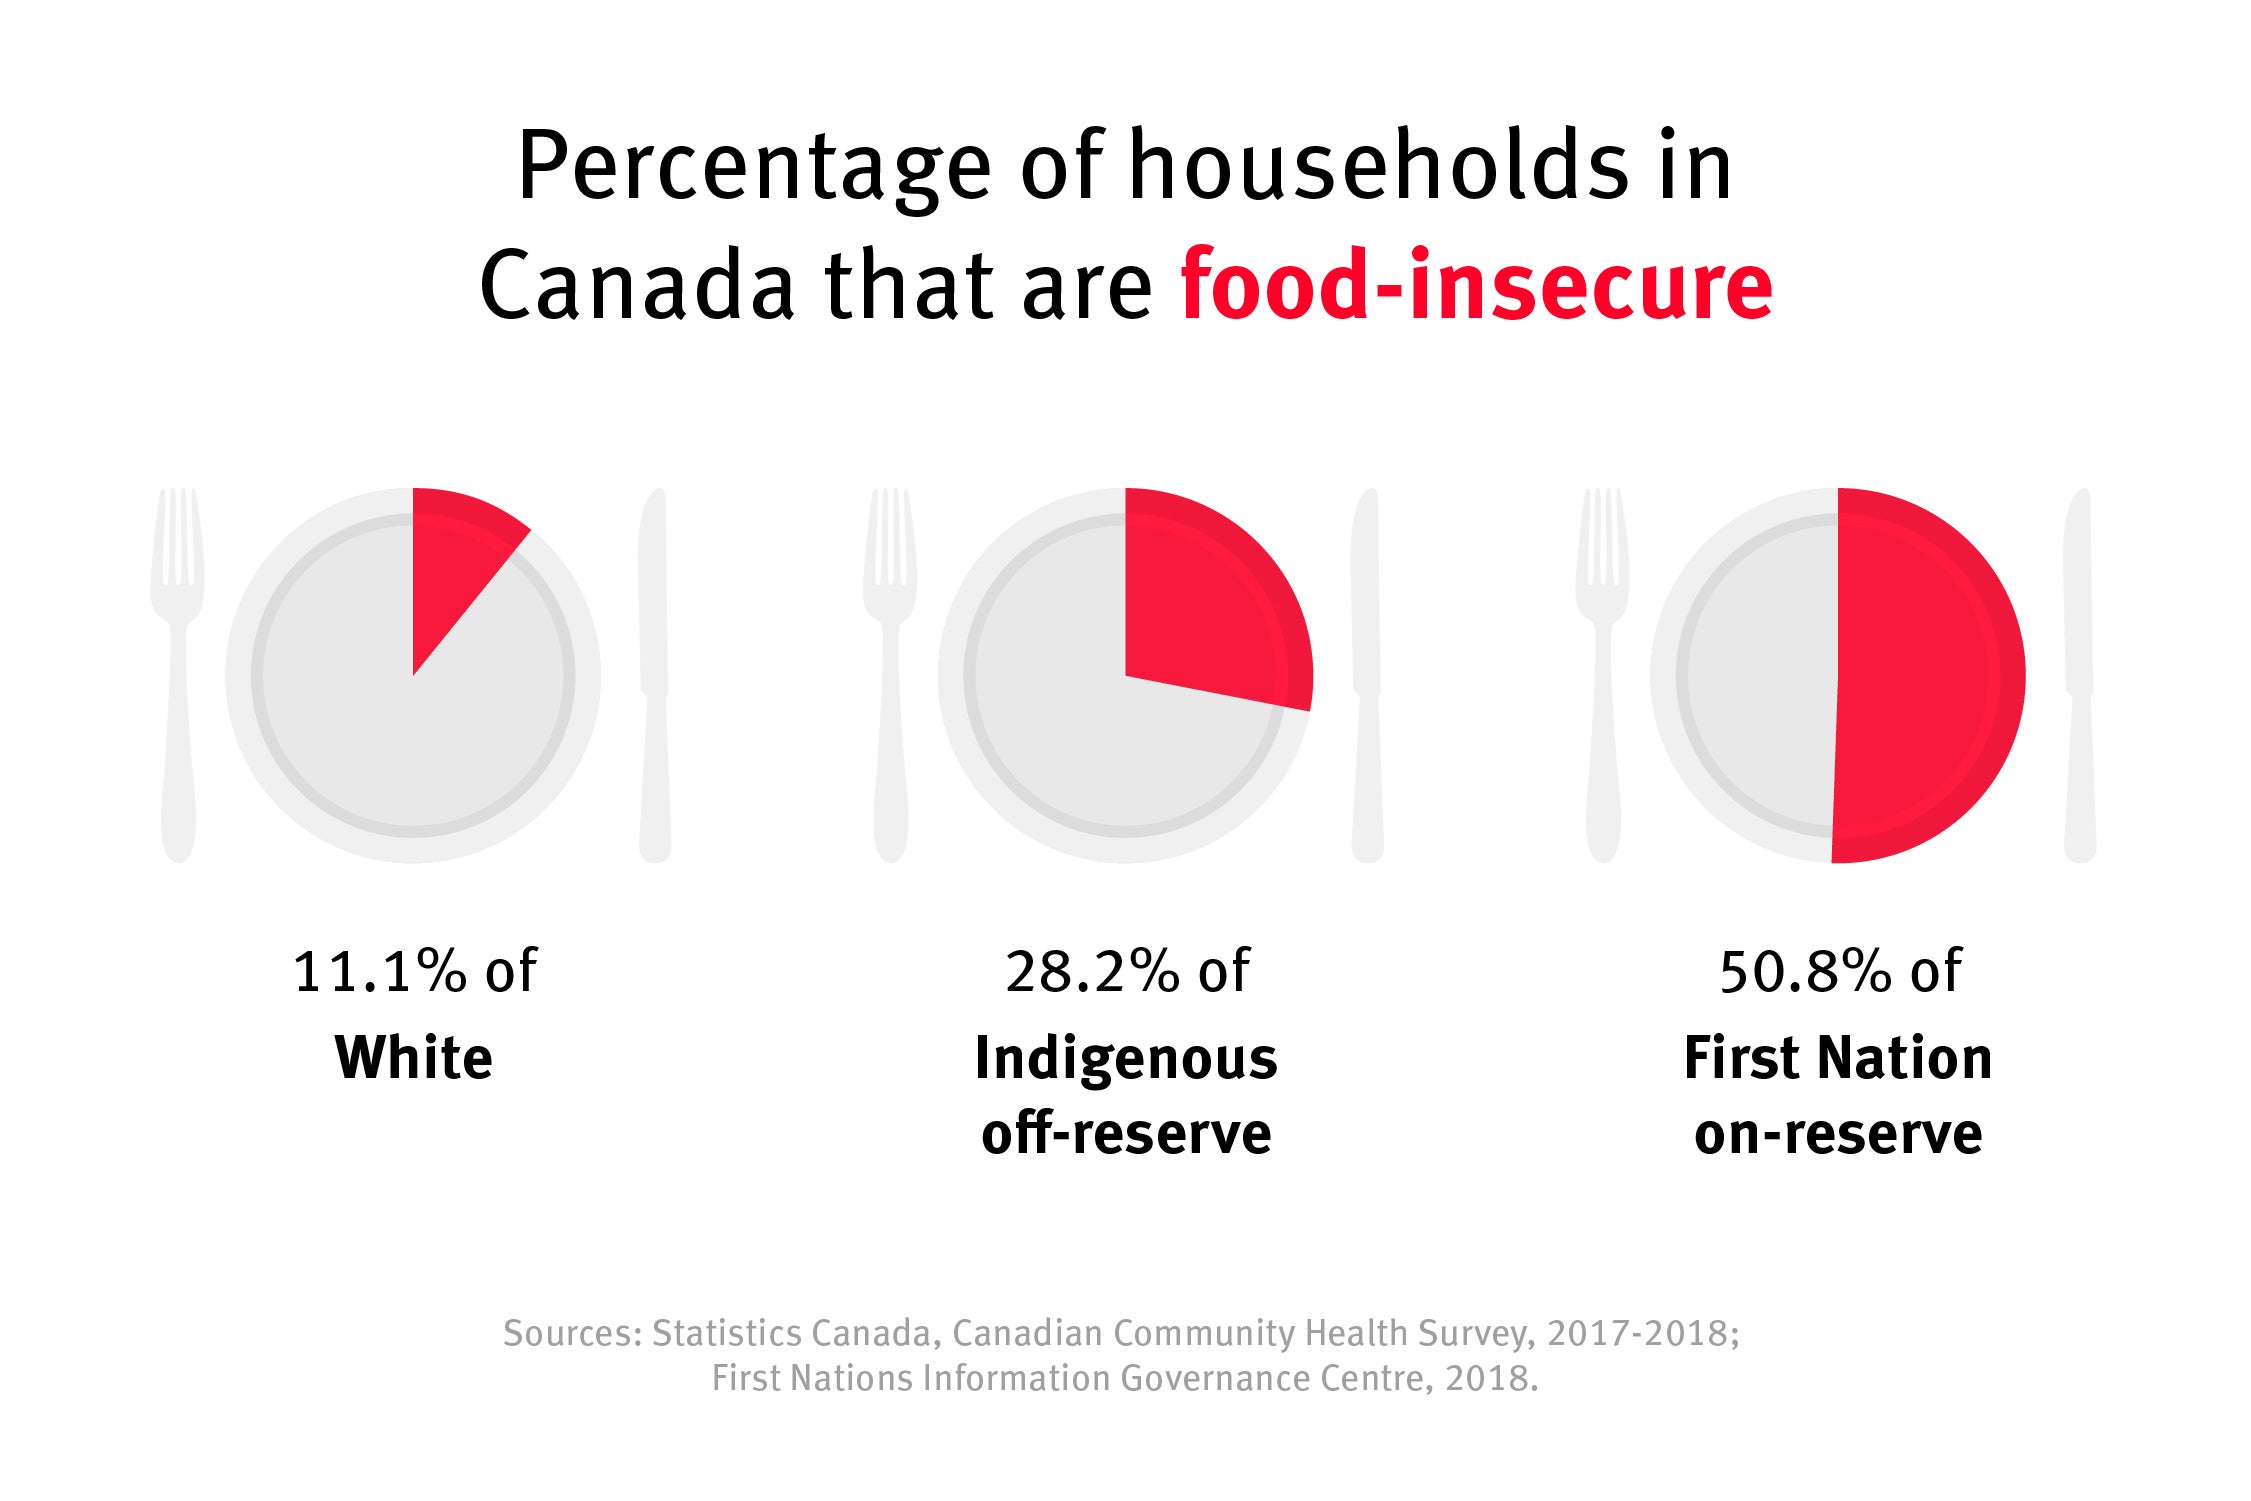 Three pie charts comparing the levels of food insecurity in white, Indigenous off-reserve, and First Nations on-reserve families in Canada